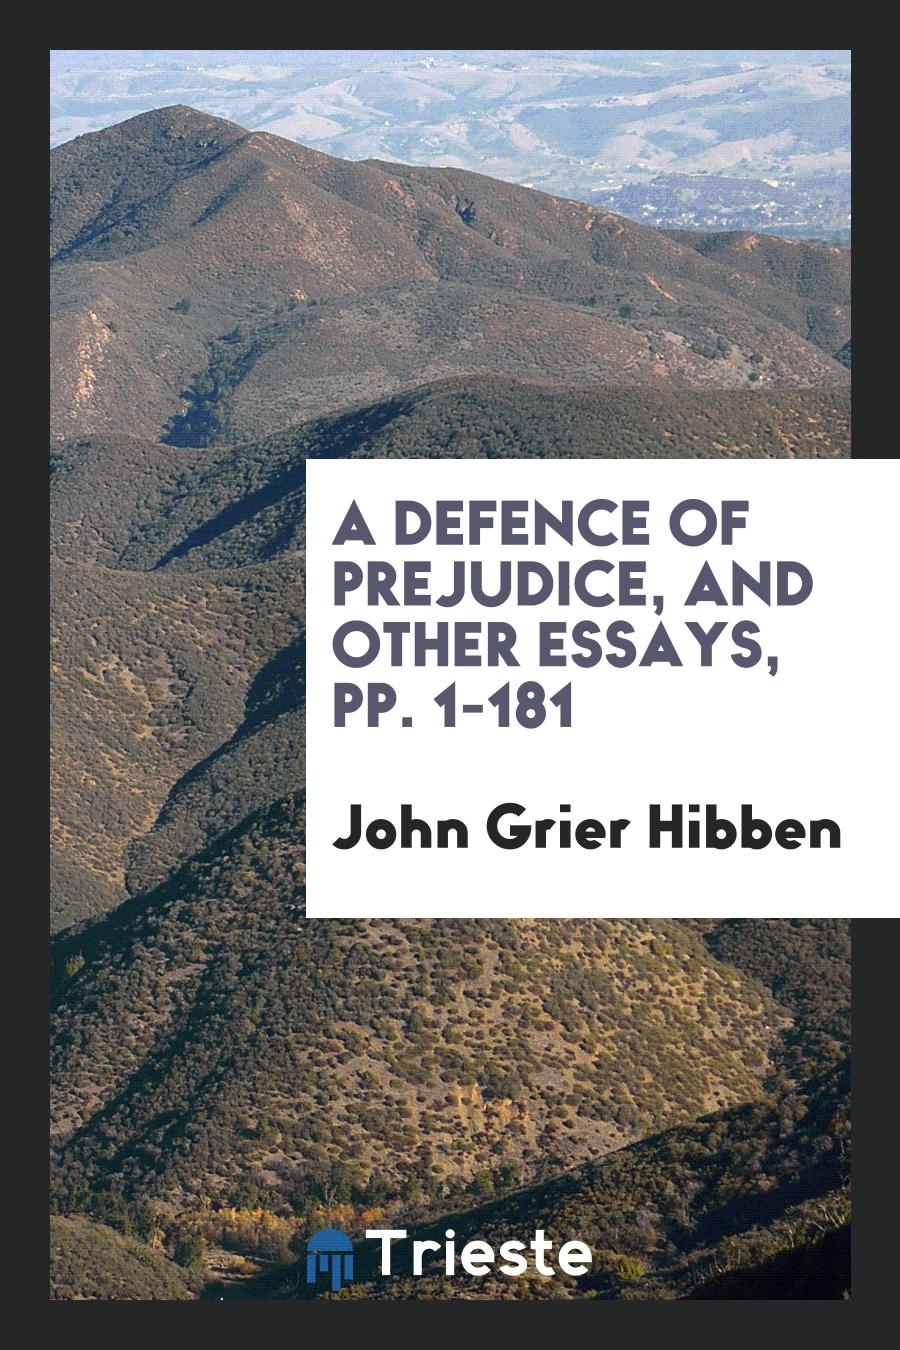 A Defence of Prejudice, and Other Essays, pp. 1-181